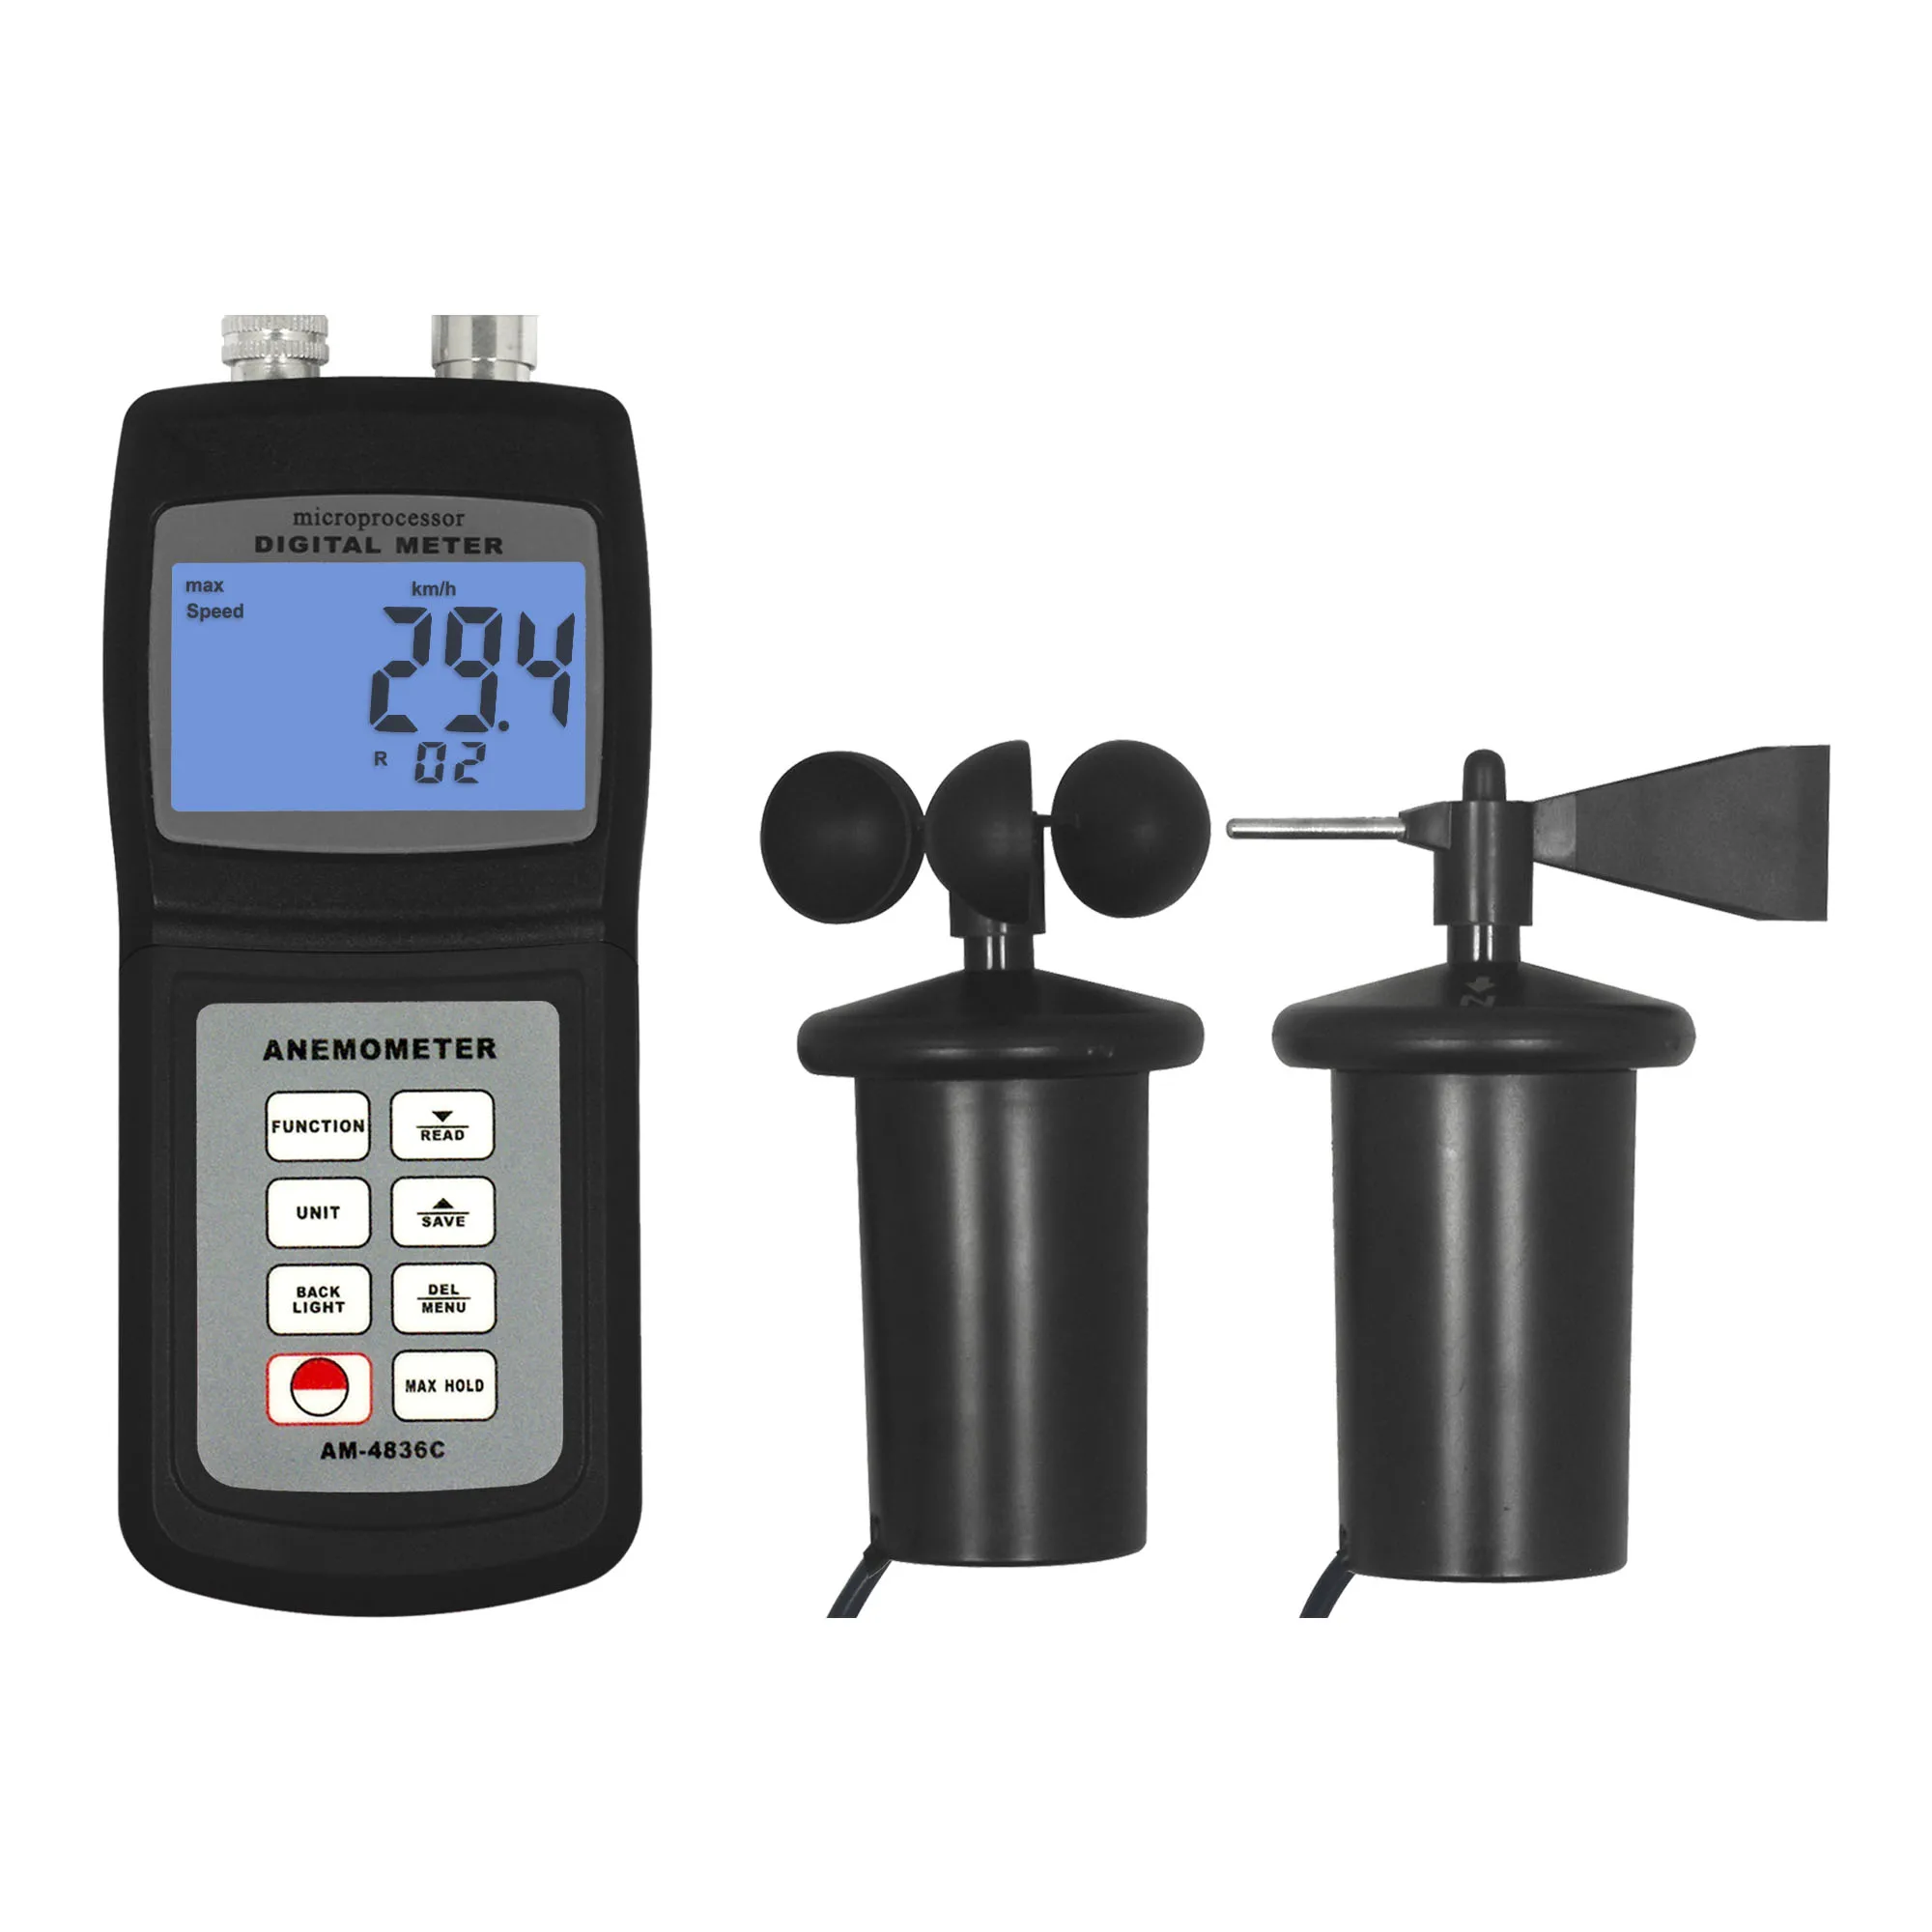 

Multifunction Anemometer 3 cup wind vane anemometer AM-4836C for Air Velocity,Air Flow,Wave Height,Direction,Temperature